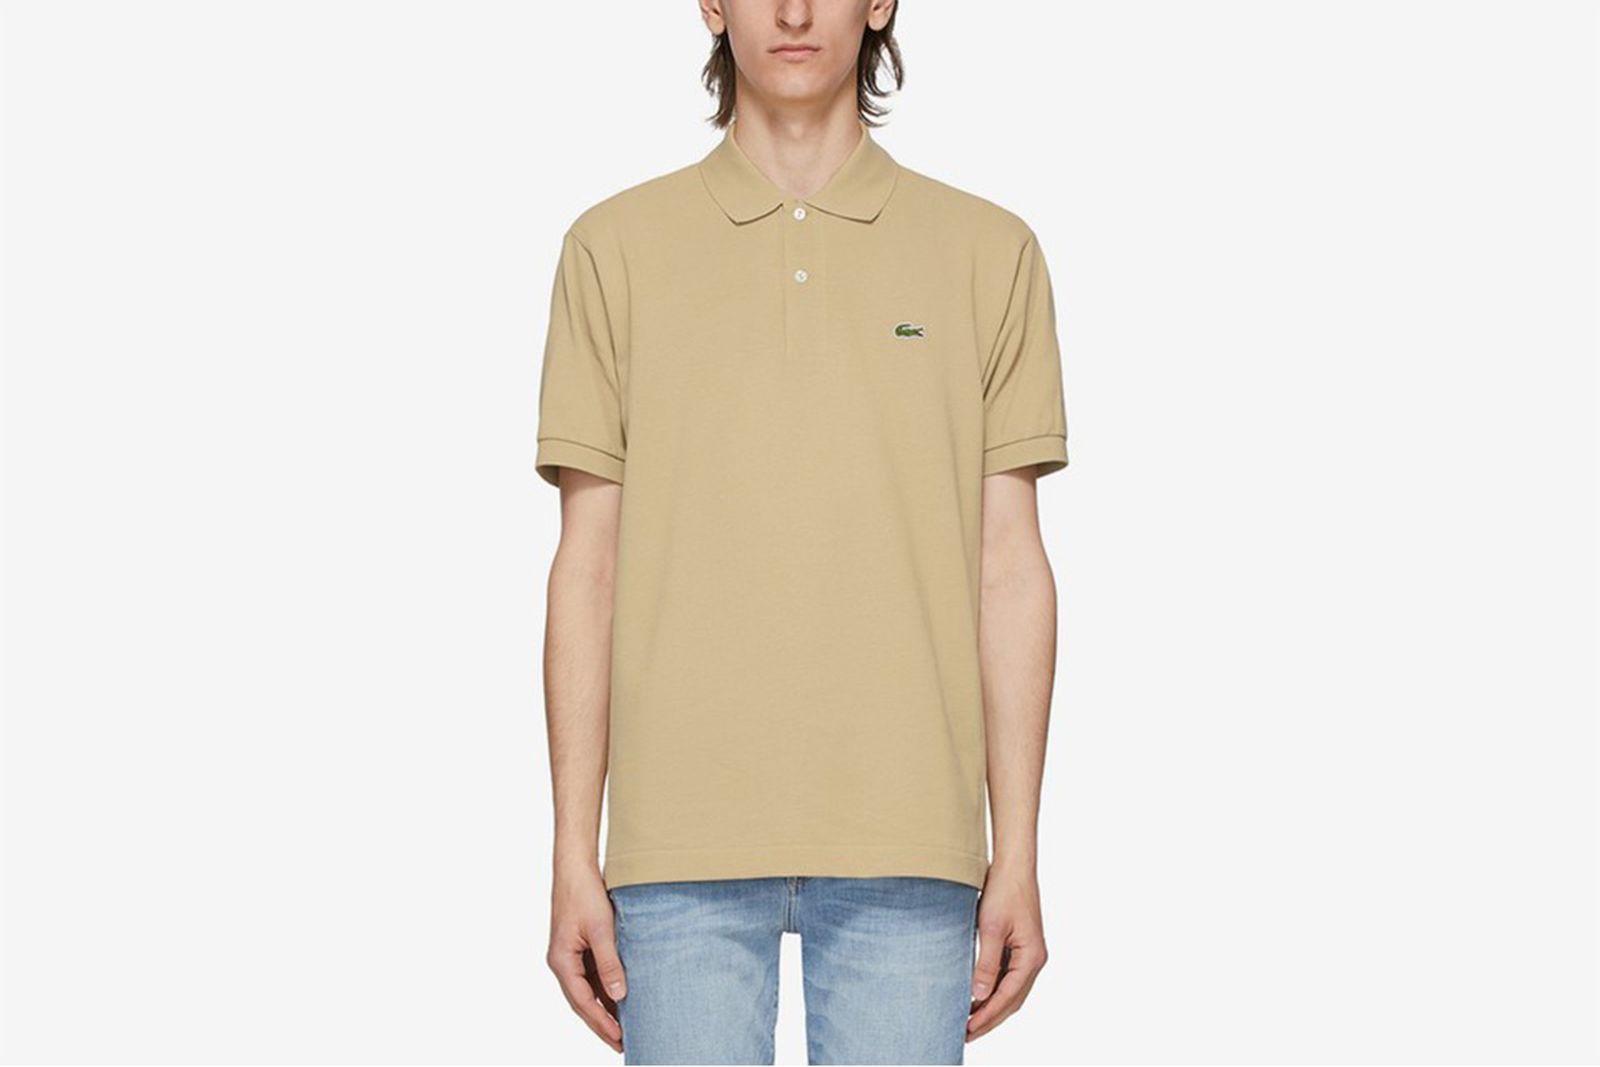 Lacoste polo shirts example